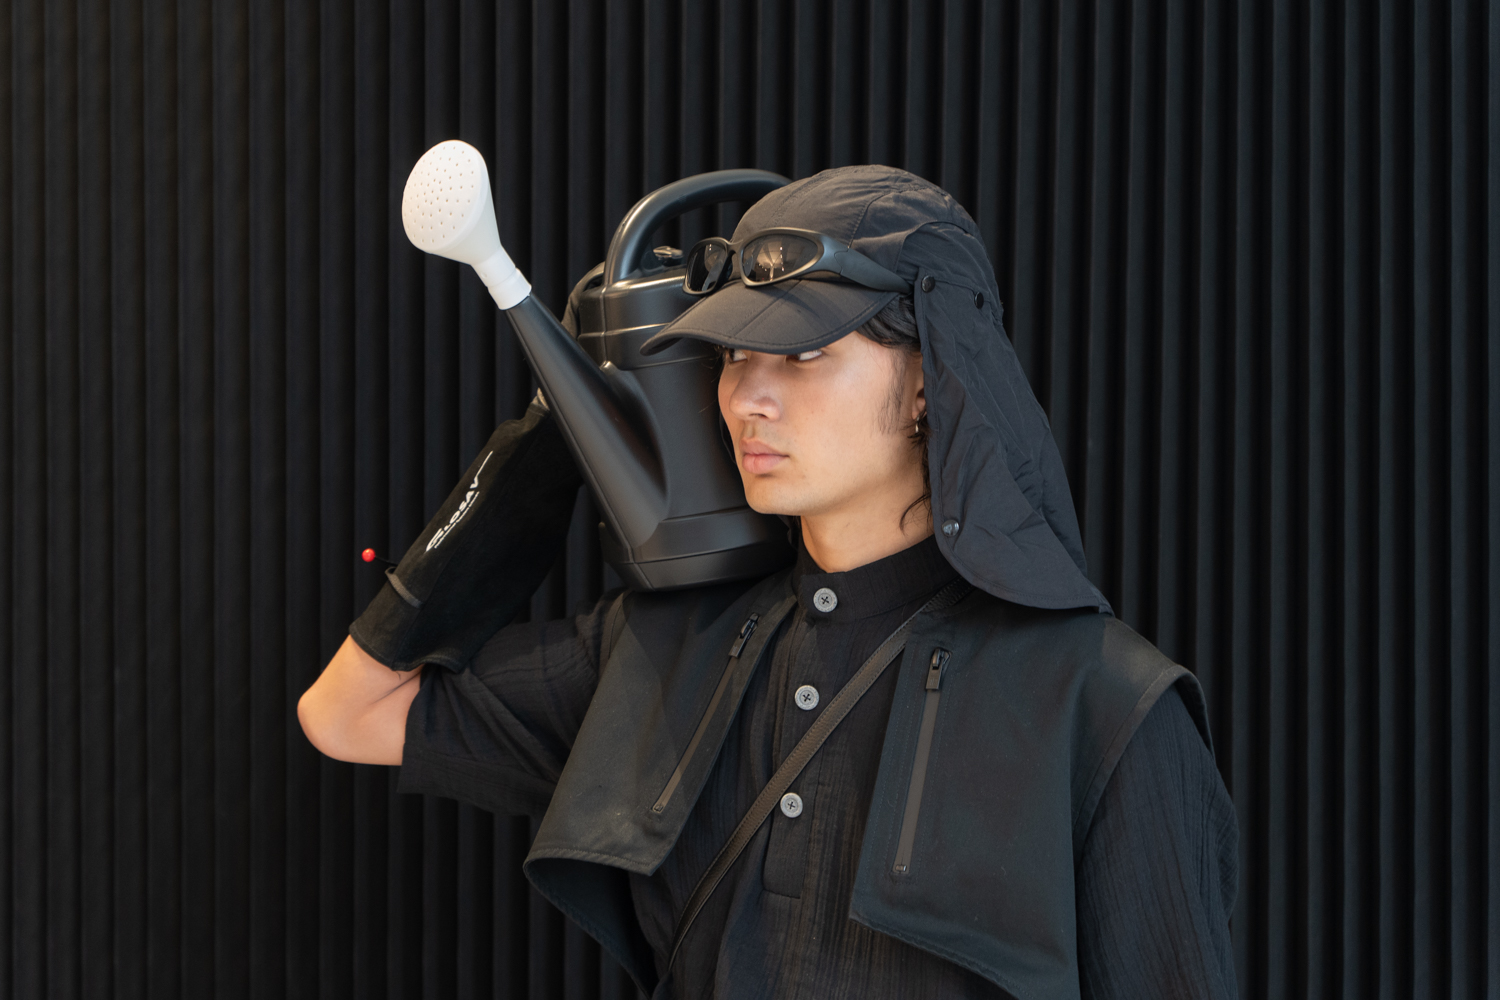 A model stands in a fashion showroom against a black backdrop. The model is wearing clothing from the brand TARPLEY, including a black hat and jacket. The model is holding a watering can.